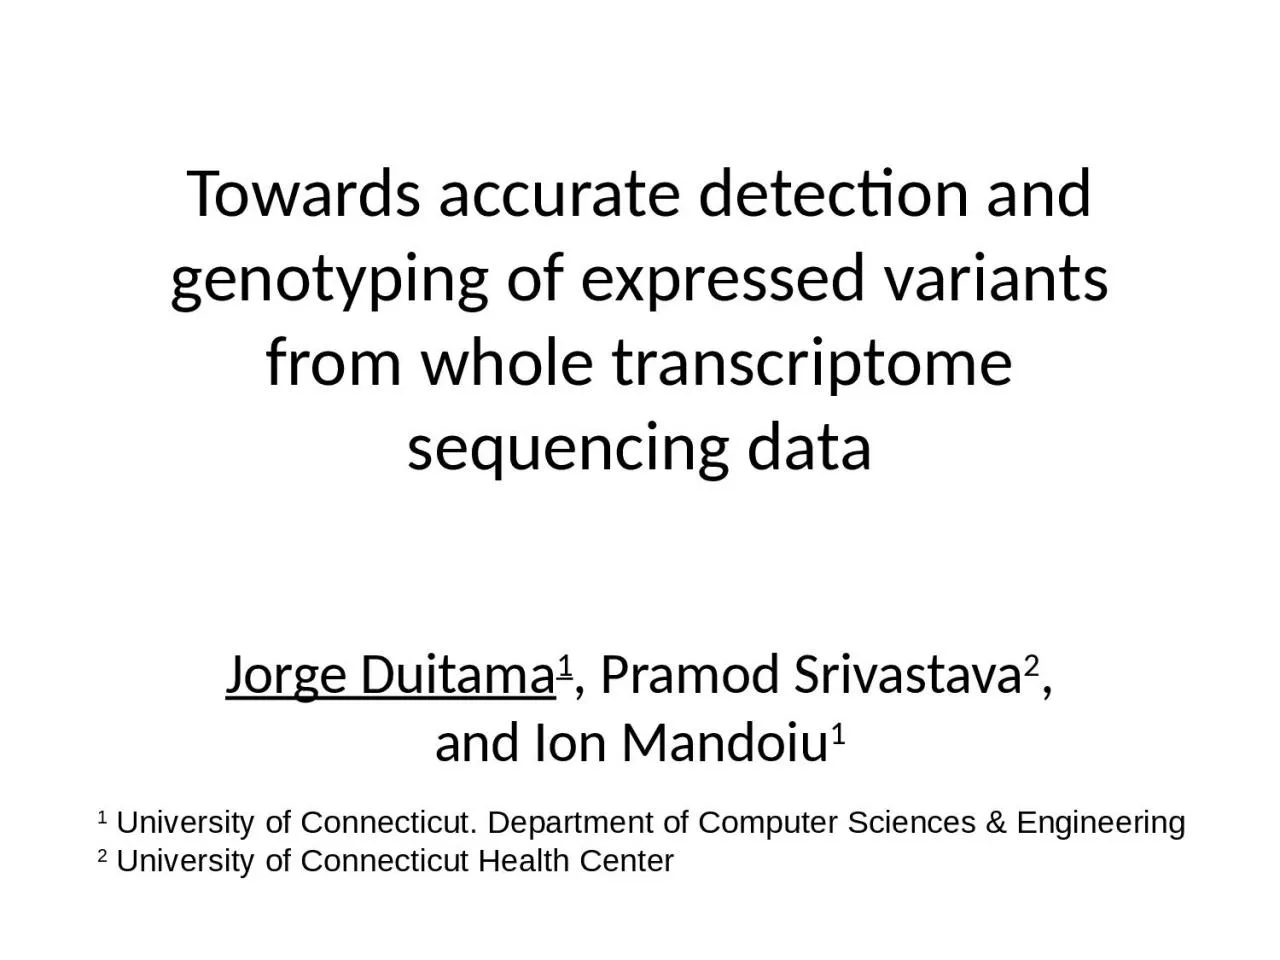 Towards accurate detection and genotyping of expressed variants from whole